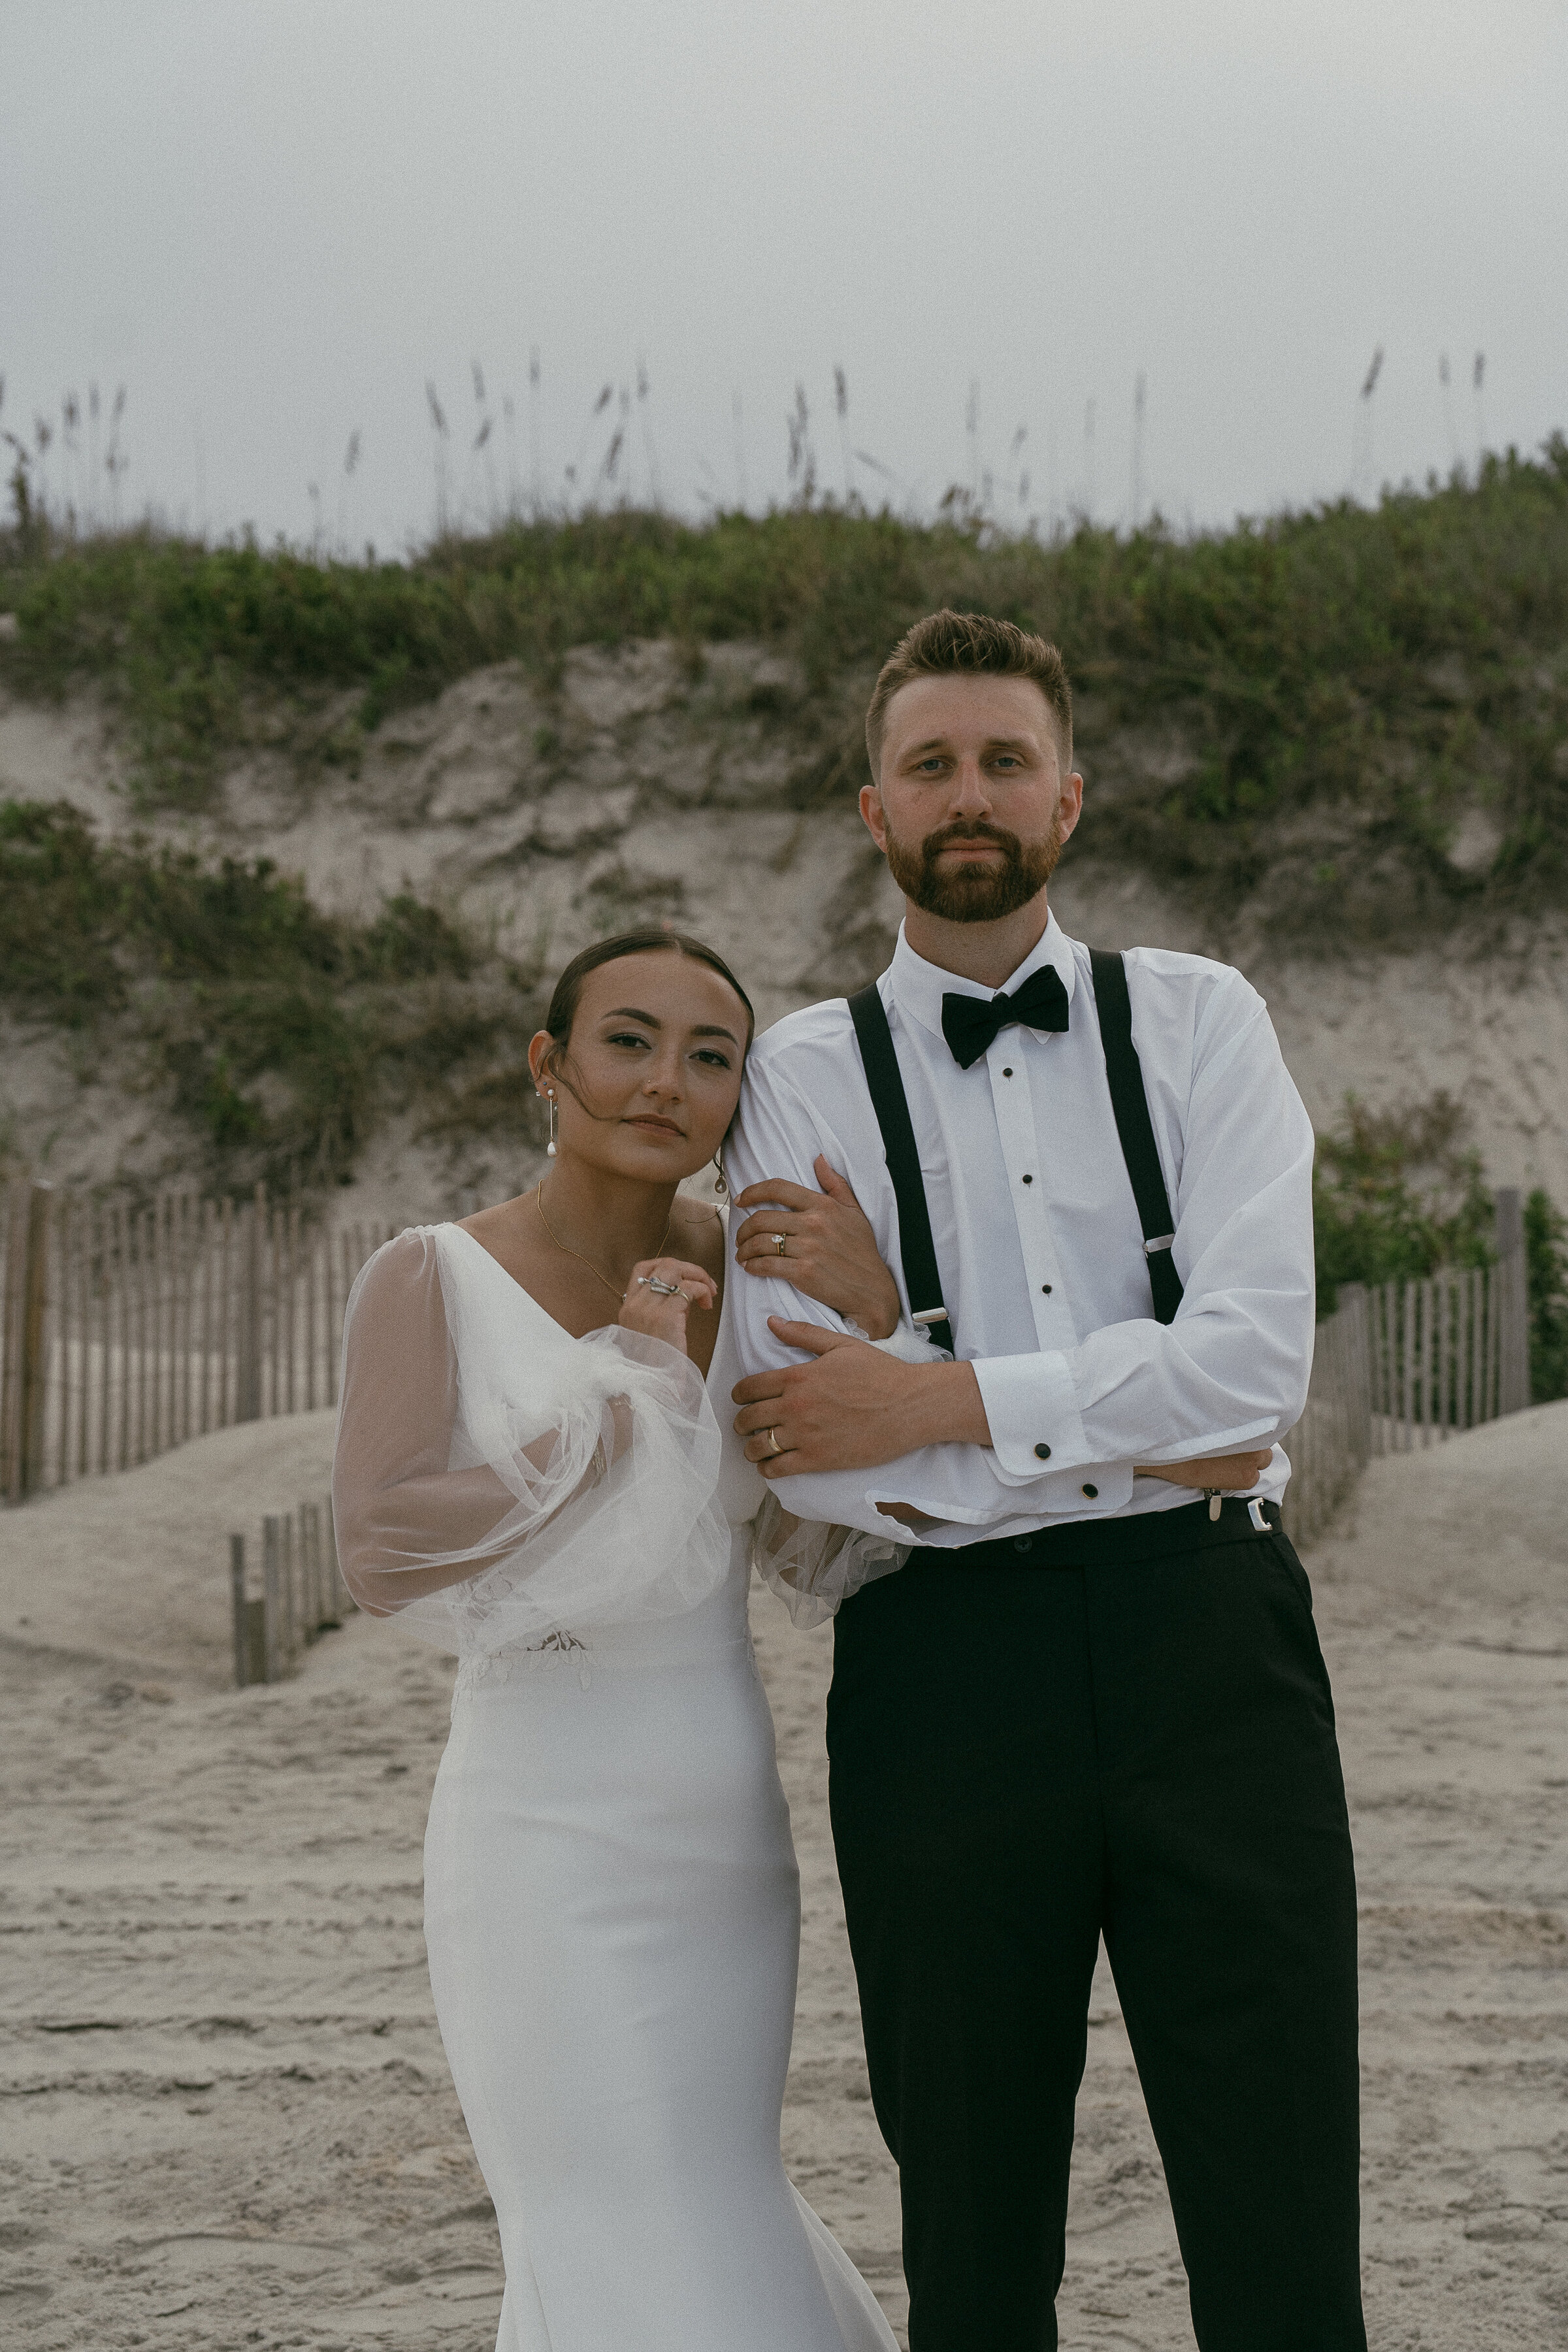 Serious pose of bride and groom on sandy beach.